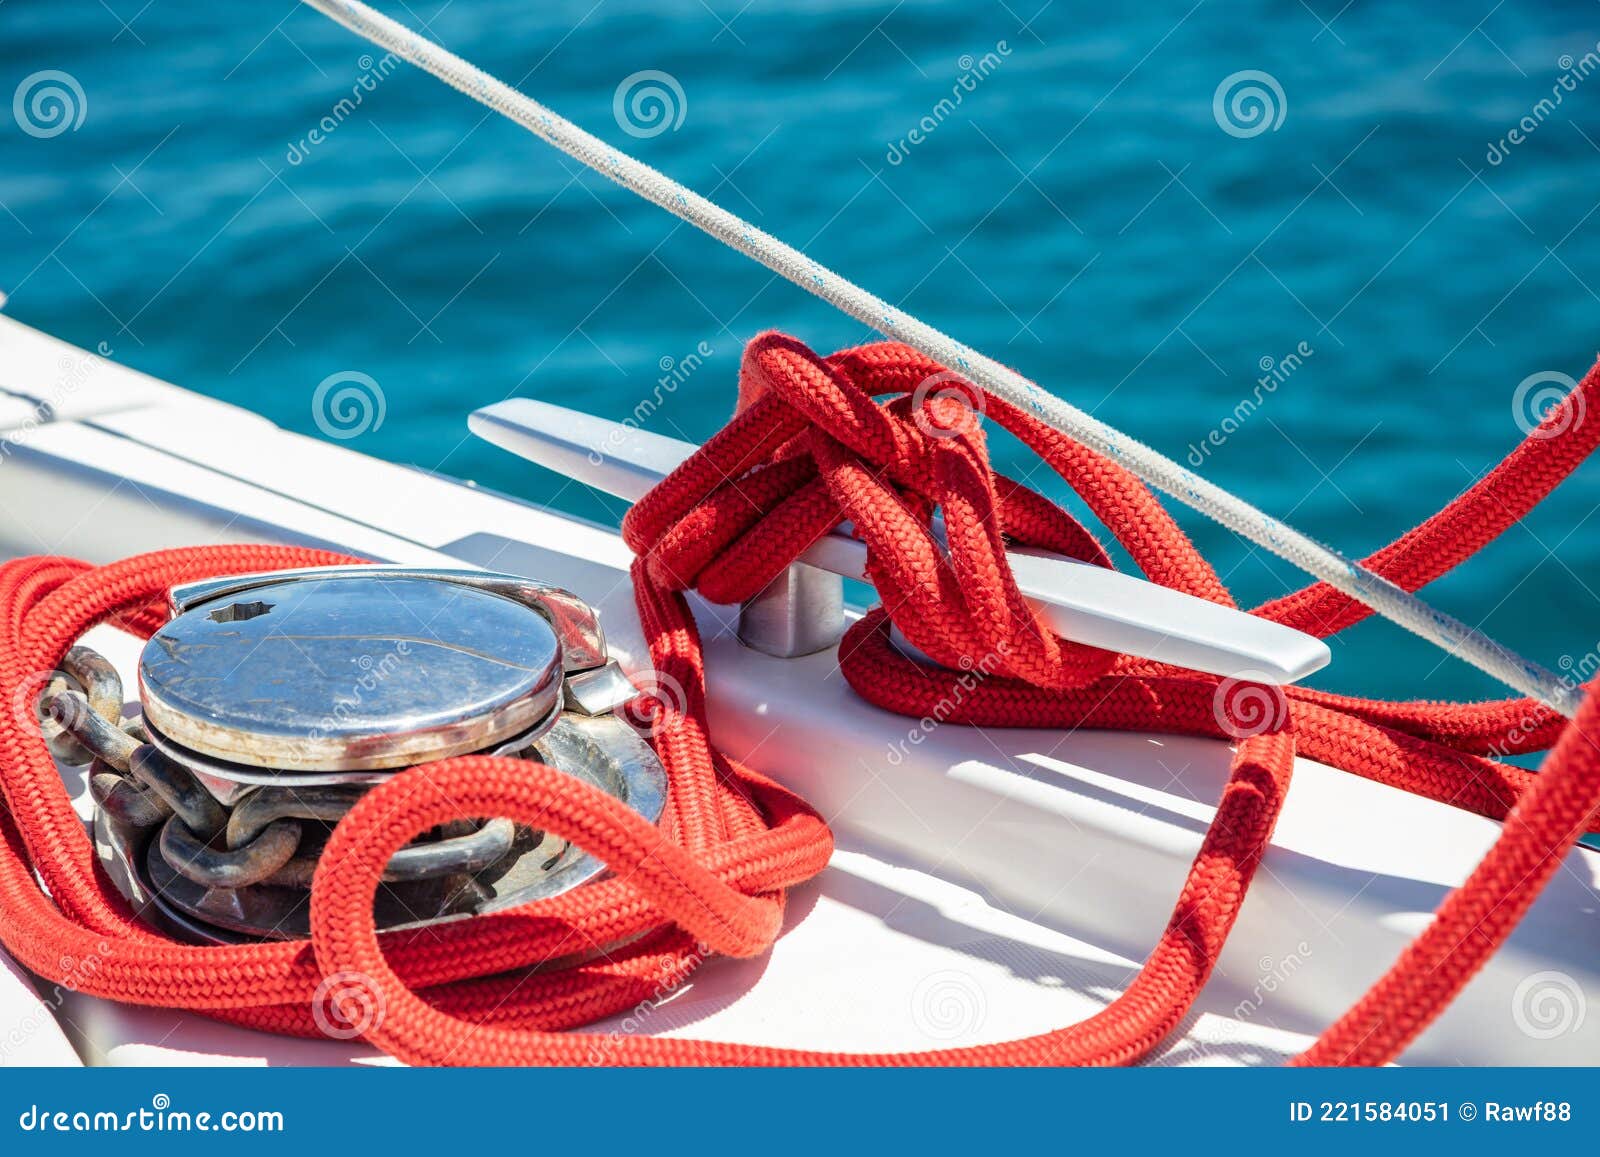 Sailing Boat Mooring Rope Tied on Cleat. Heavy Metal Chain Around the Winch  Stock Image - Image of equipment, maritime: 221584051